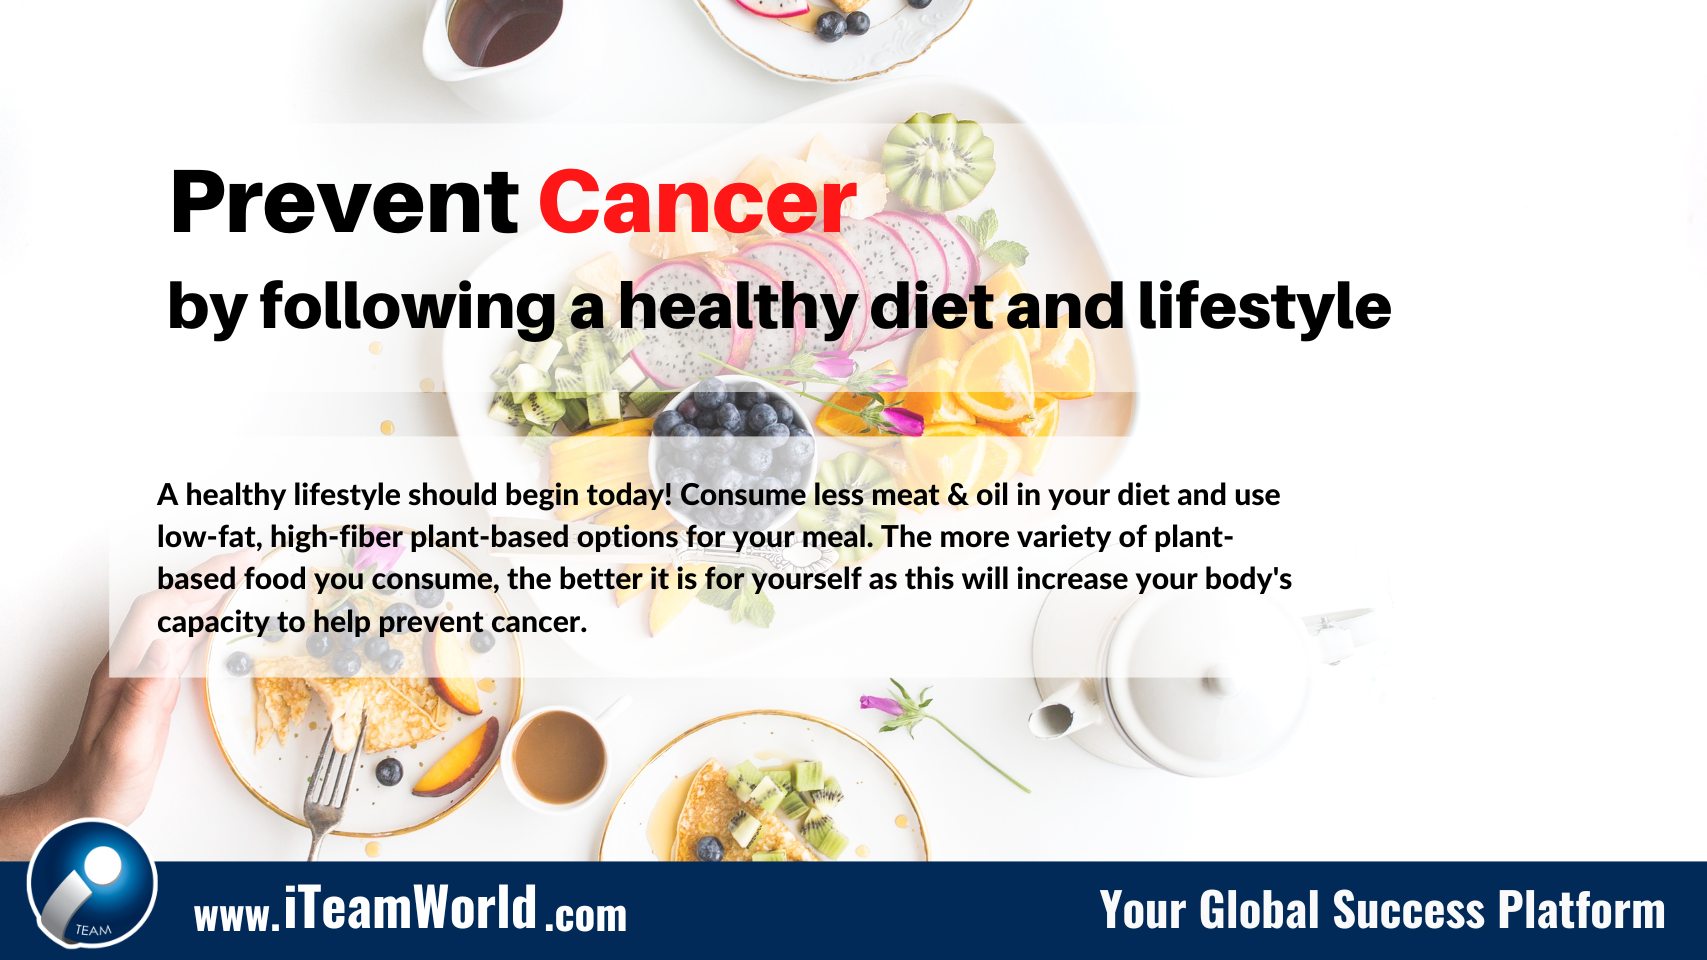 Prevent Cancer by following a healthy diet and lifestyle